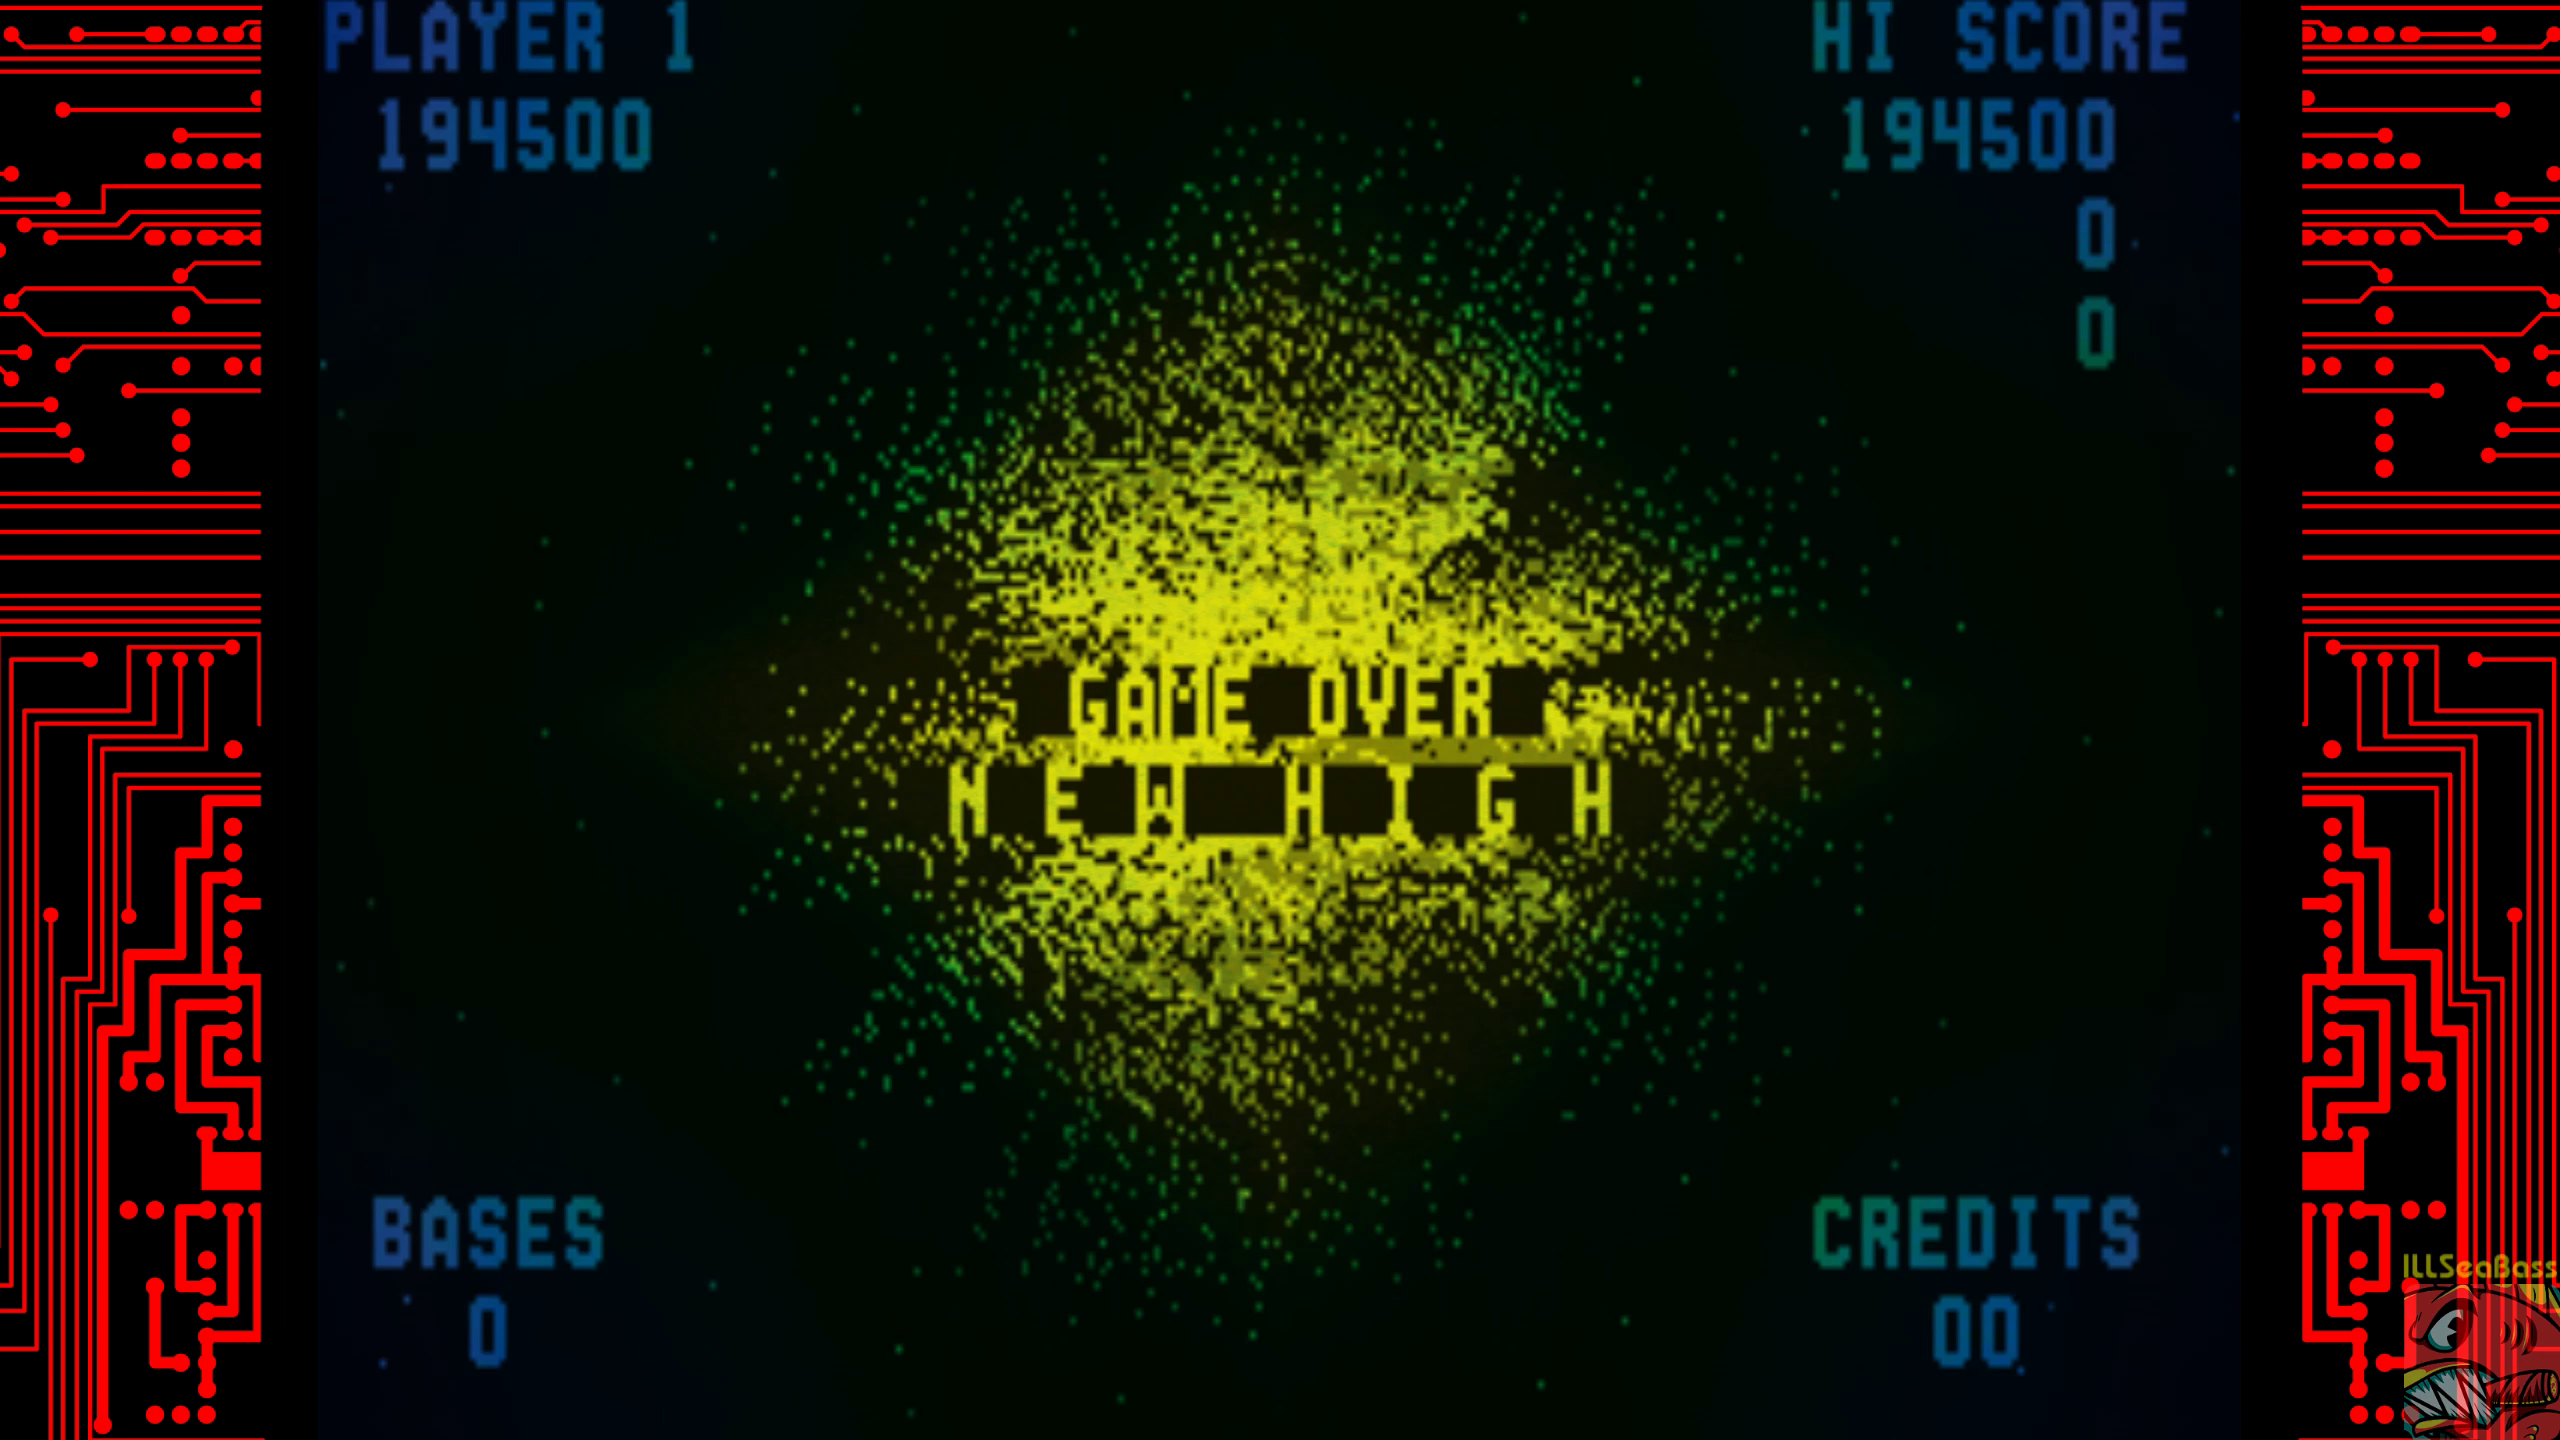 ILLSeaBass: Space Zap (Arcade Emulated / M.A.M.E.) 194,500 points on 2019-05-13 22:33:22